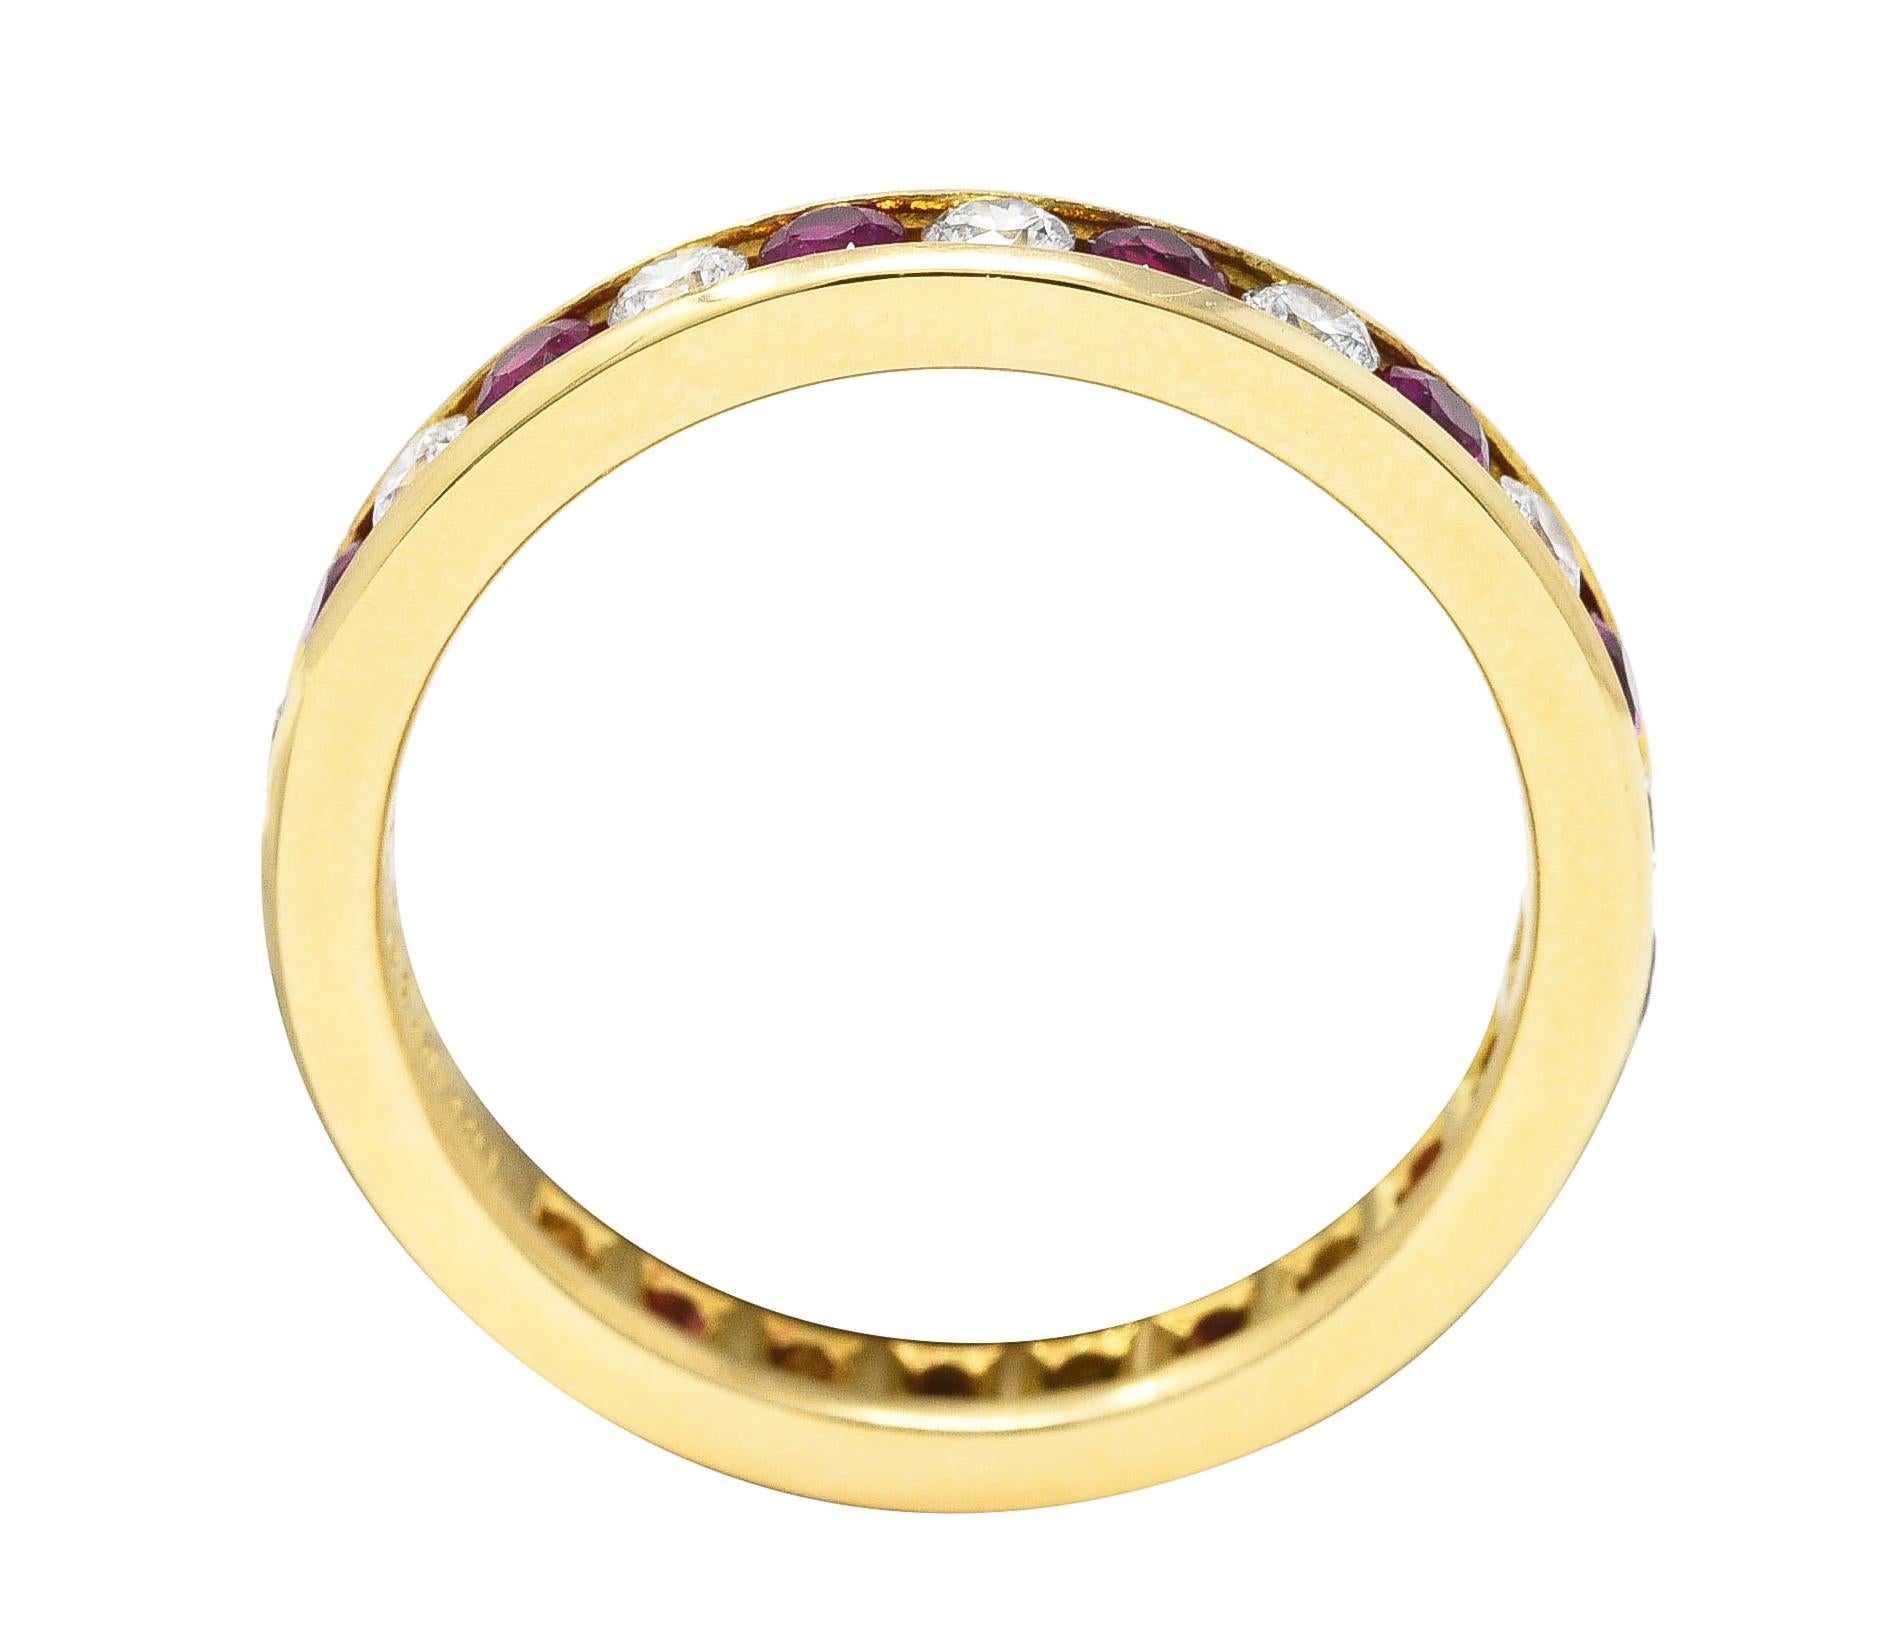 Tiffany & Co. 1.20 Carat Diamond Ruby 18 Karat Yellow Gold Vintage Eternity Ring In Excellent Condition For Sale In Philadelphia, PA